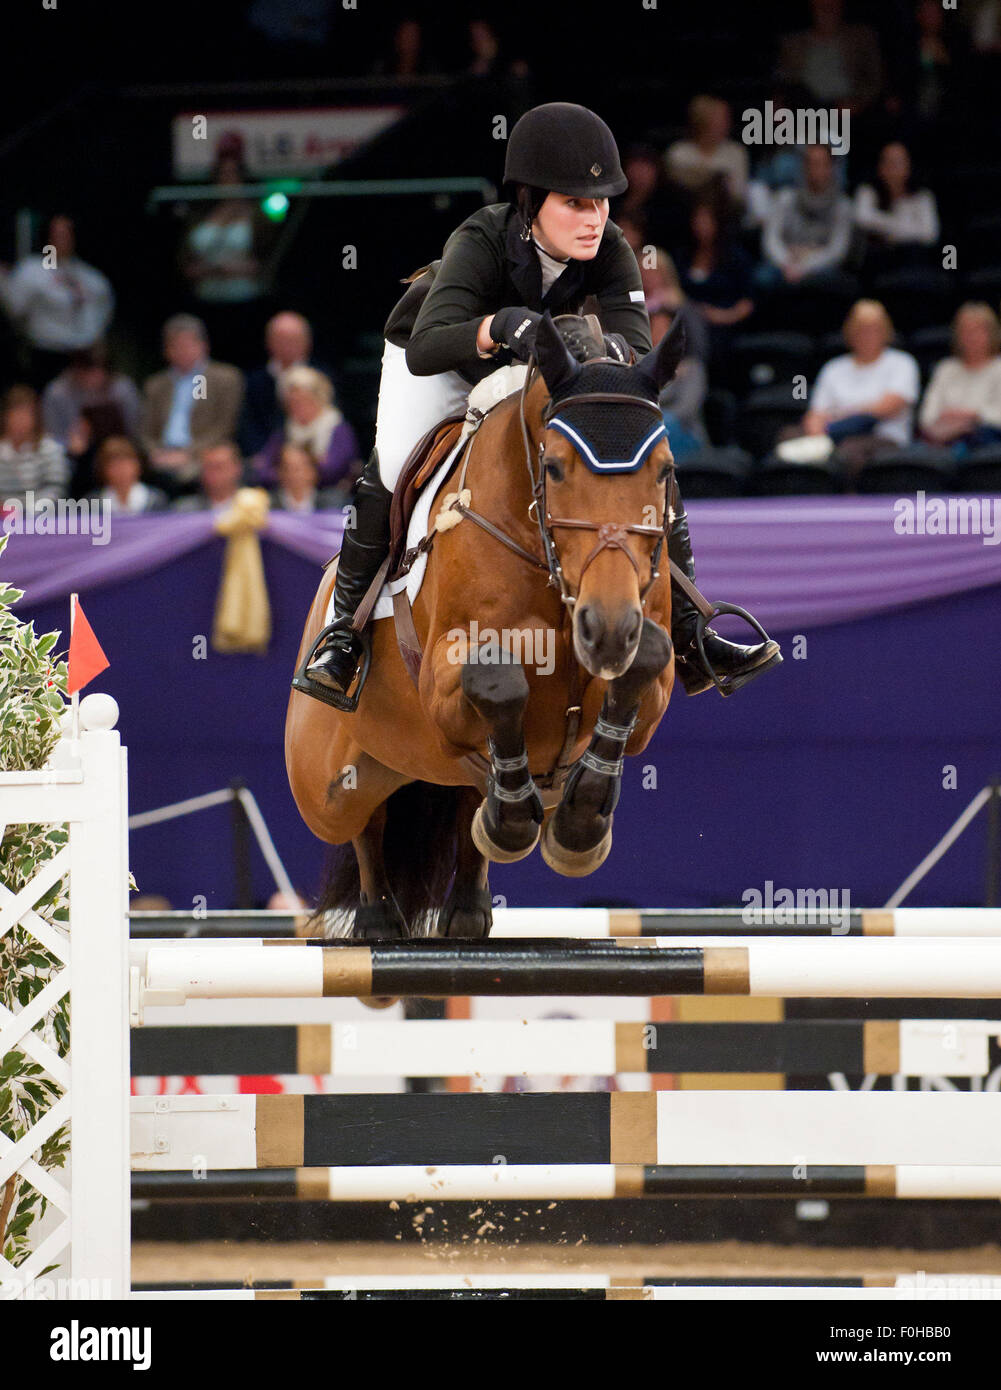 N.E.C. Birmingham, England. Jessica Springsteen and Ravilious competing in the Grandstand Welcome Stakes at The Horse Of the Year Show 2011. 6/10/11. Stock Photo